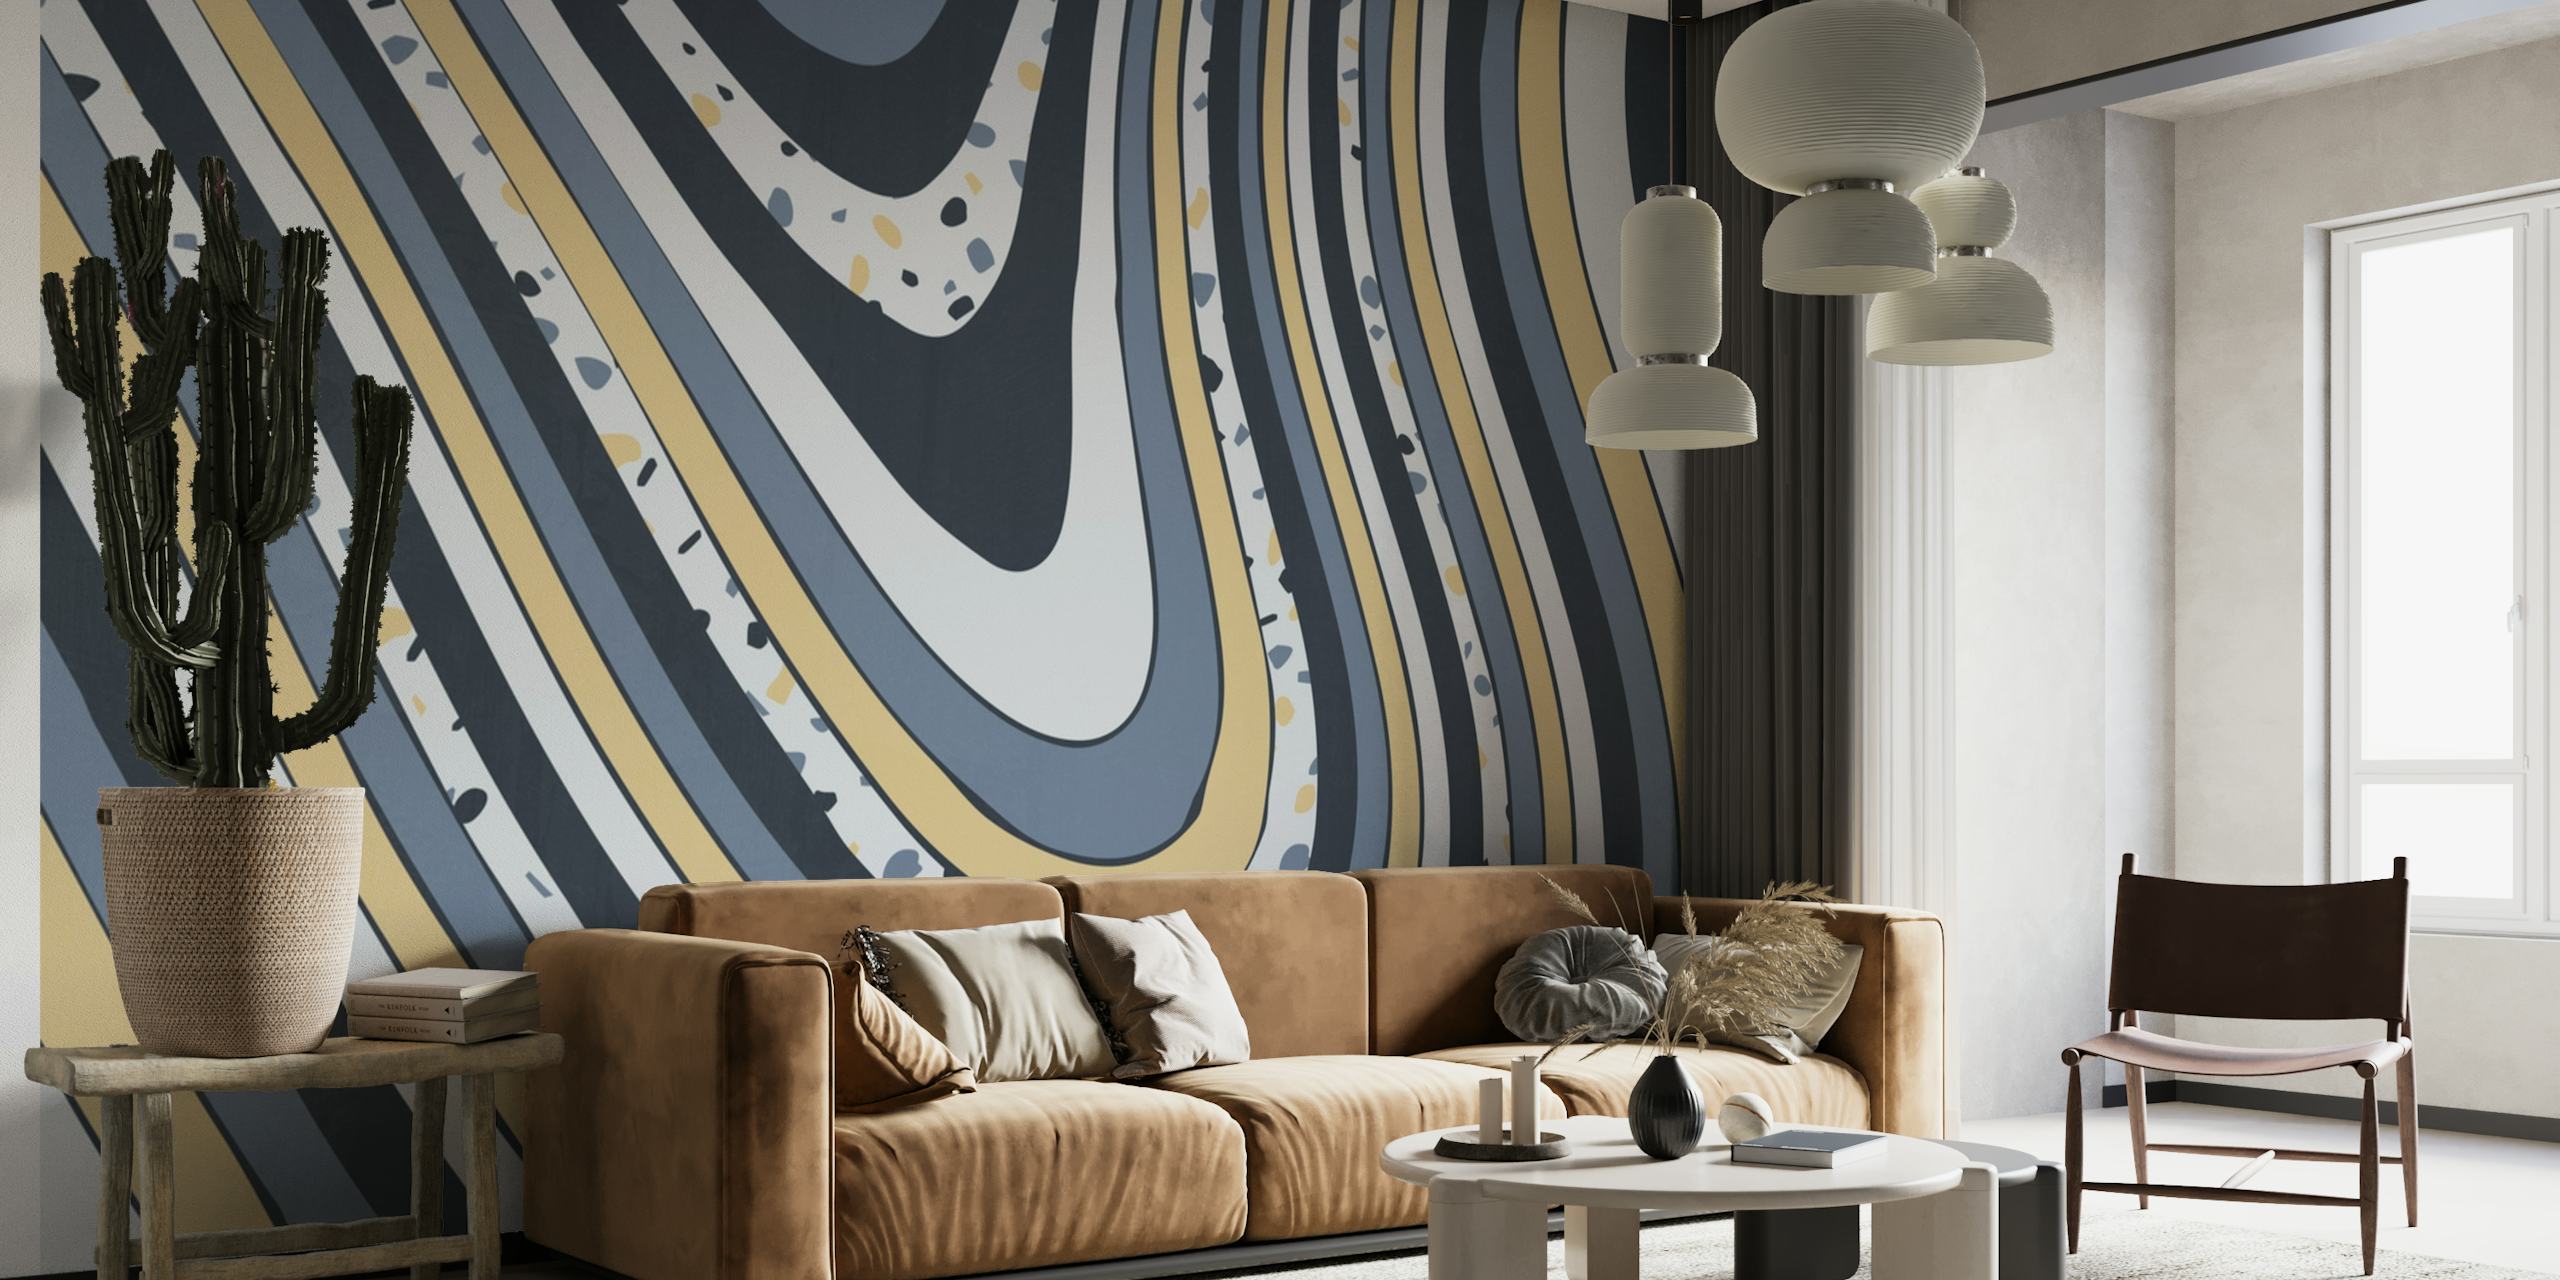 Abstract Organic XIV wall mural featuring swirling lines in grays, cream, gold, and black